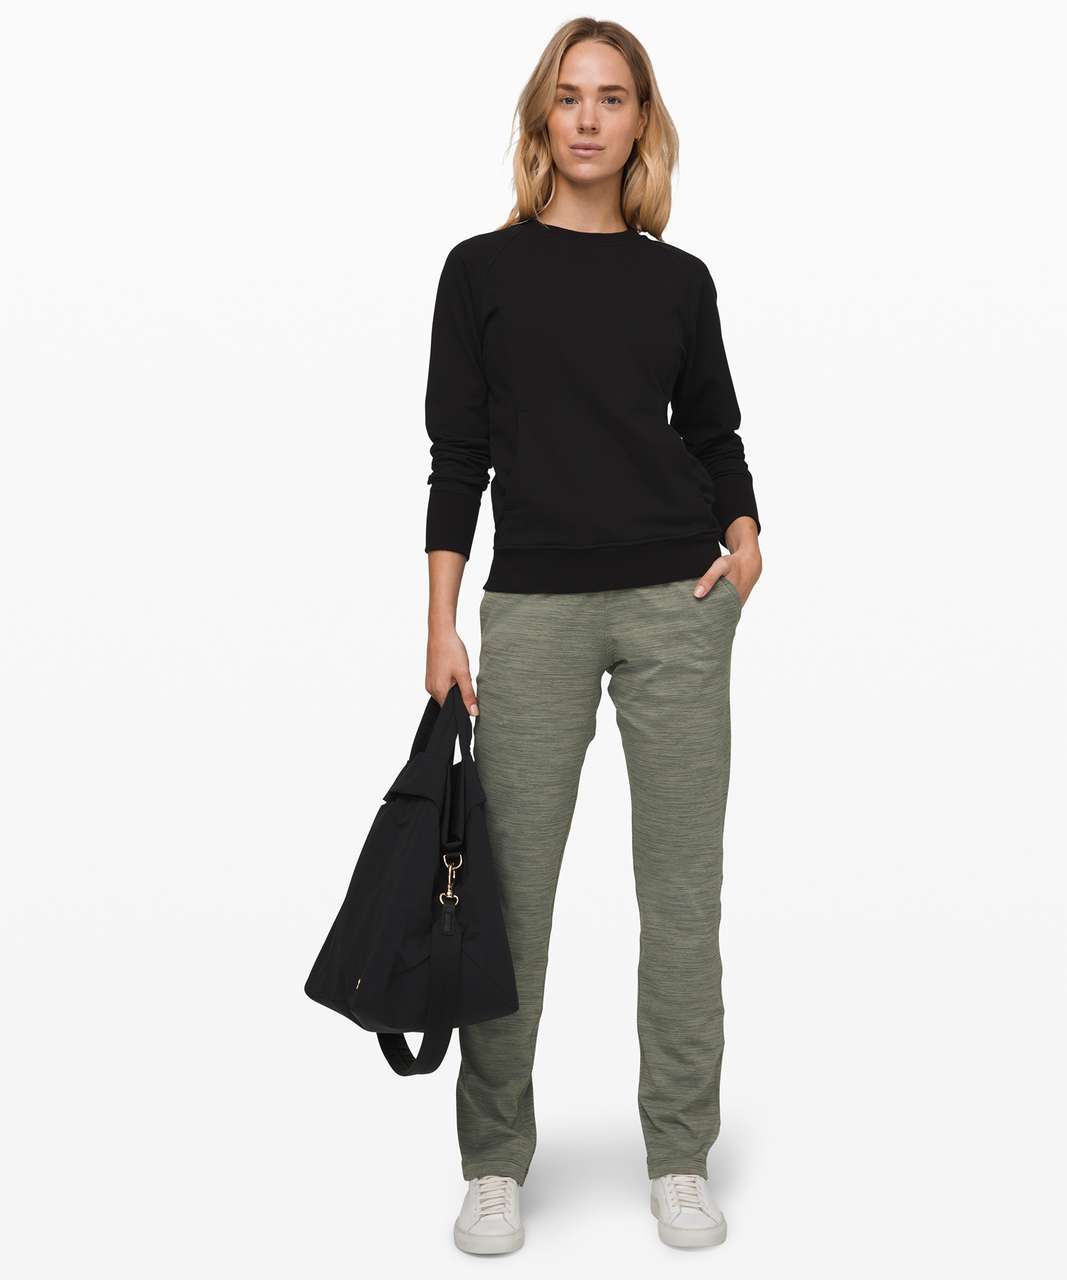 Lululemon On the Fly Pant Full Length - Wee Are From Space Sage Dark Olive